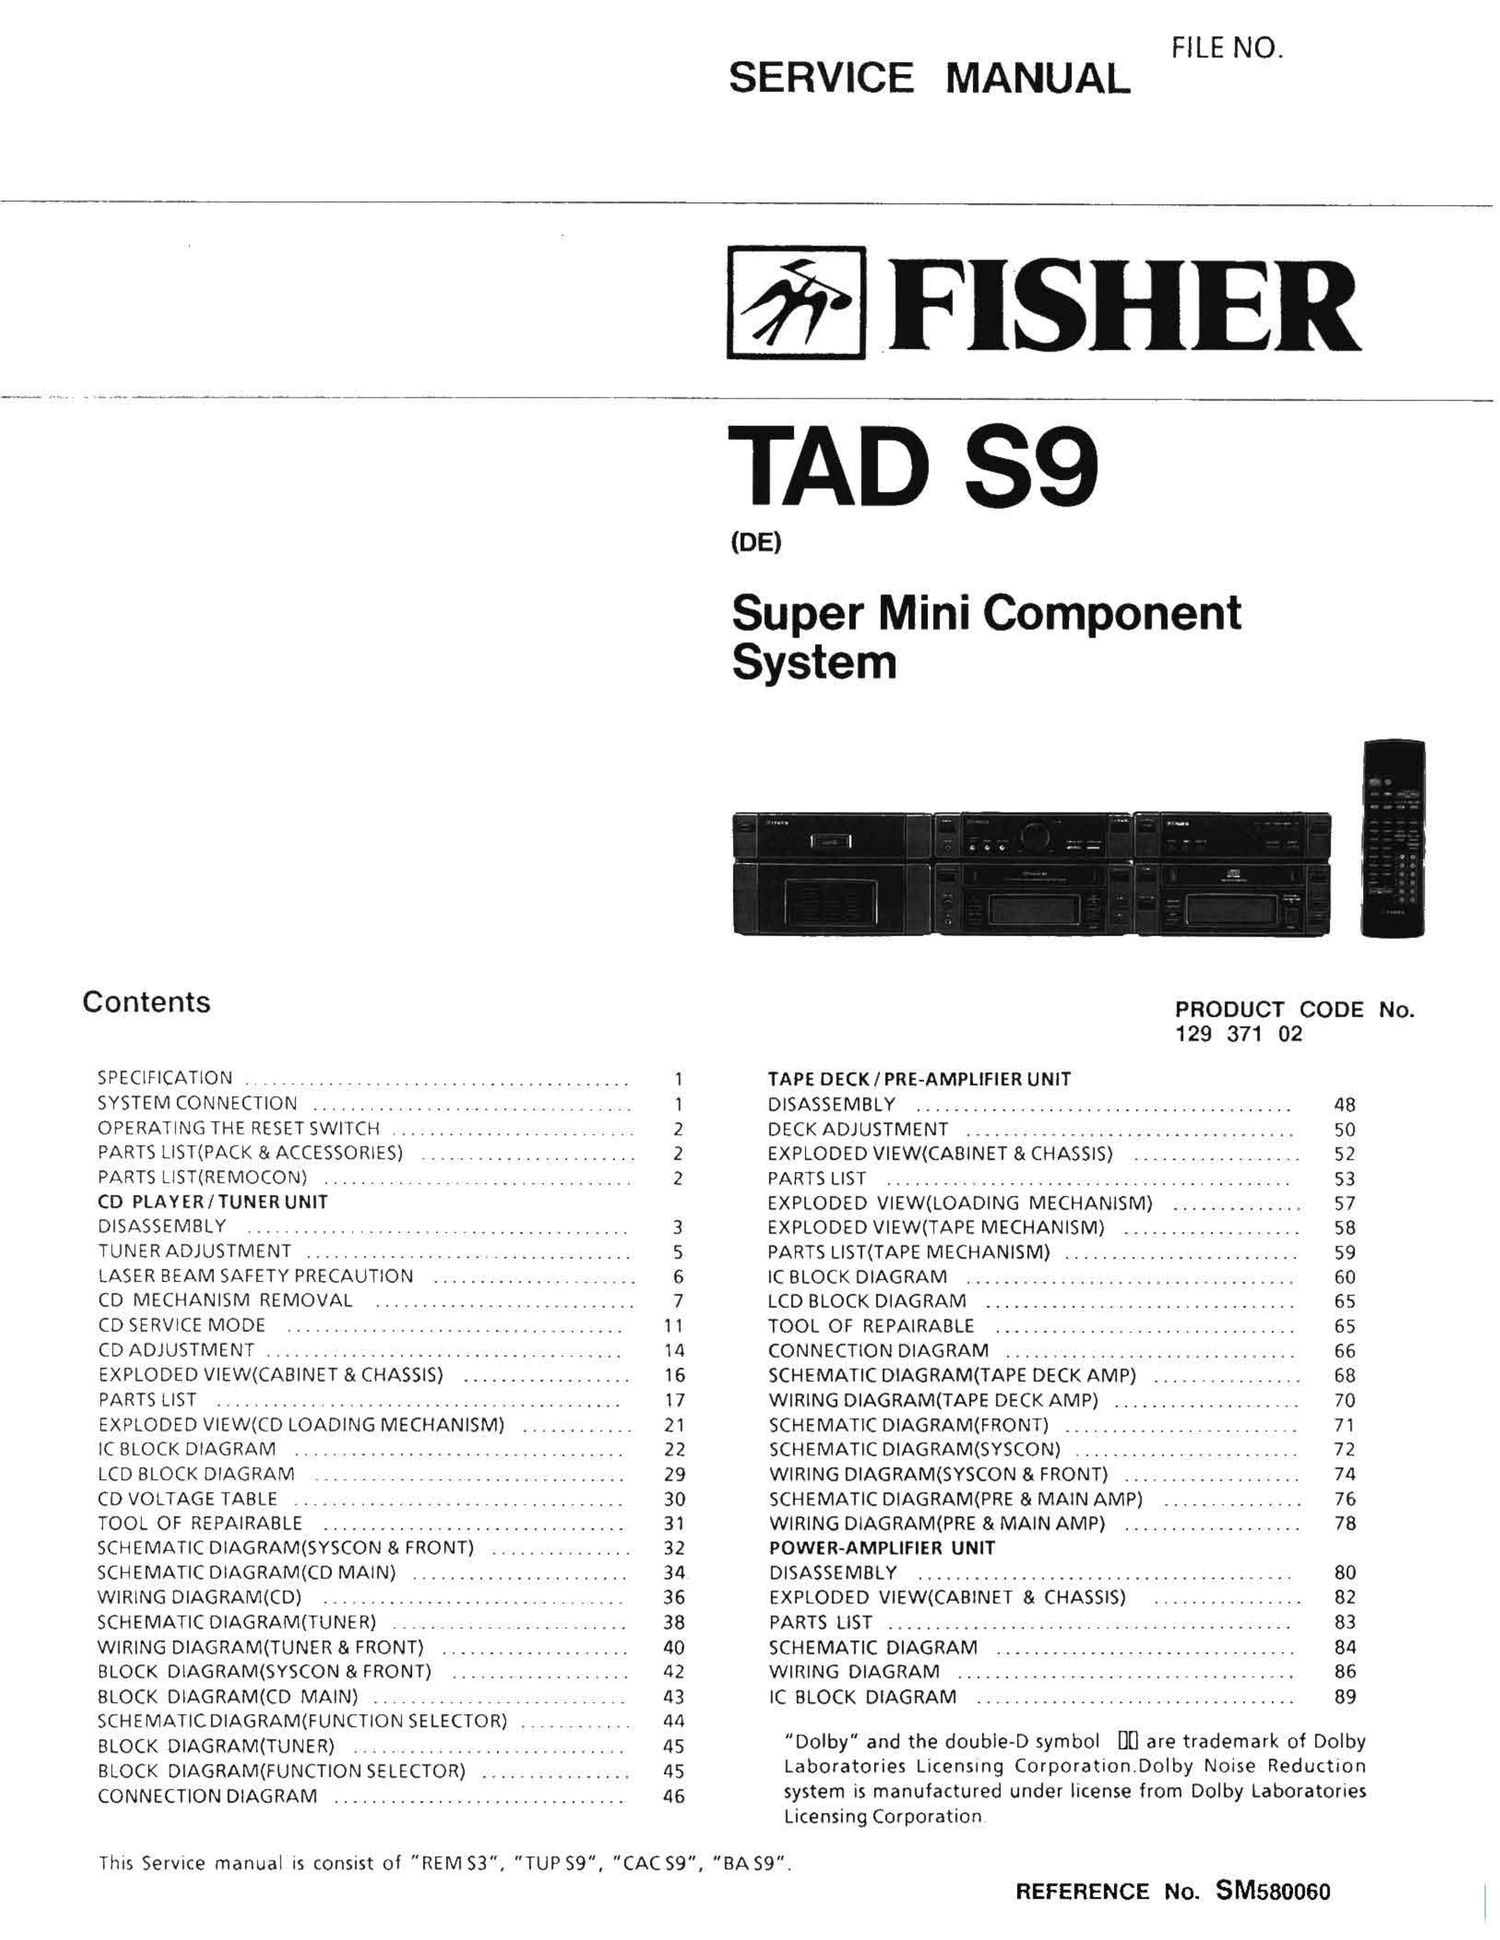 Fisher TAD S9 Schematic